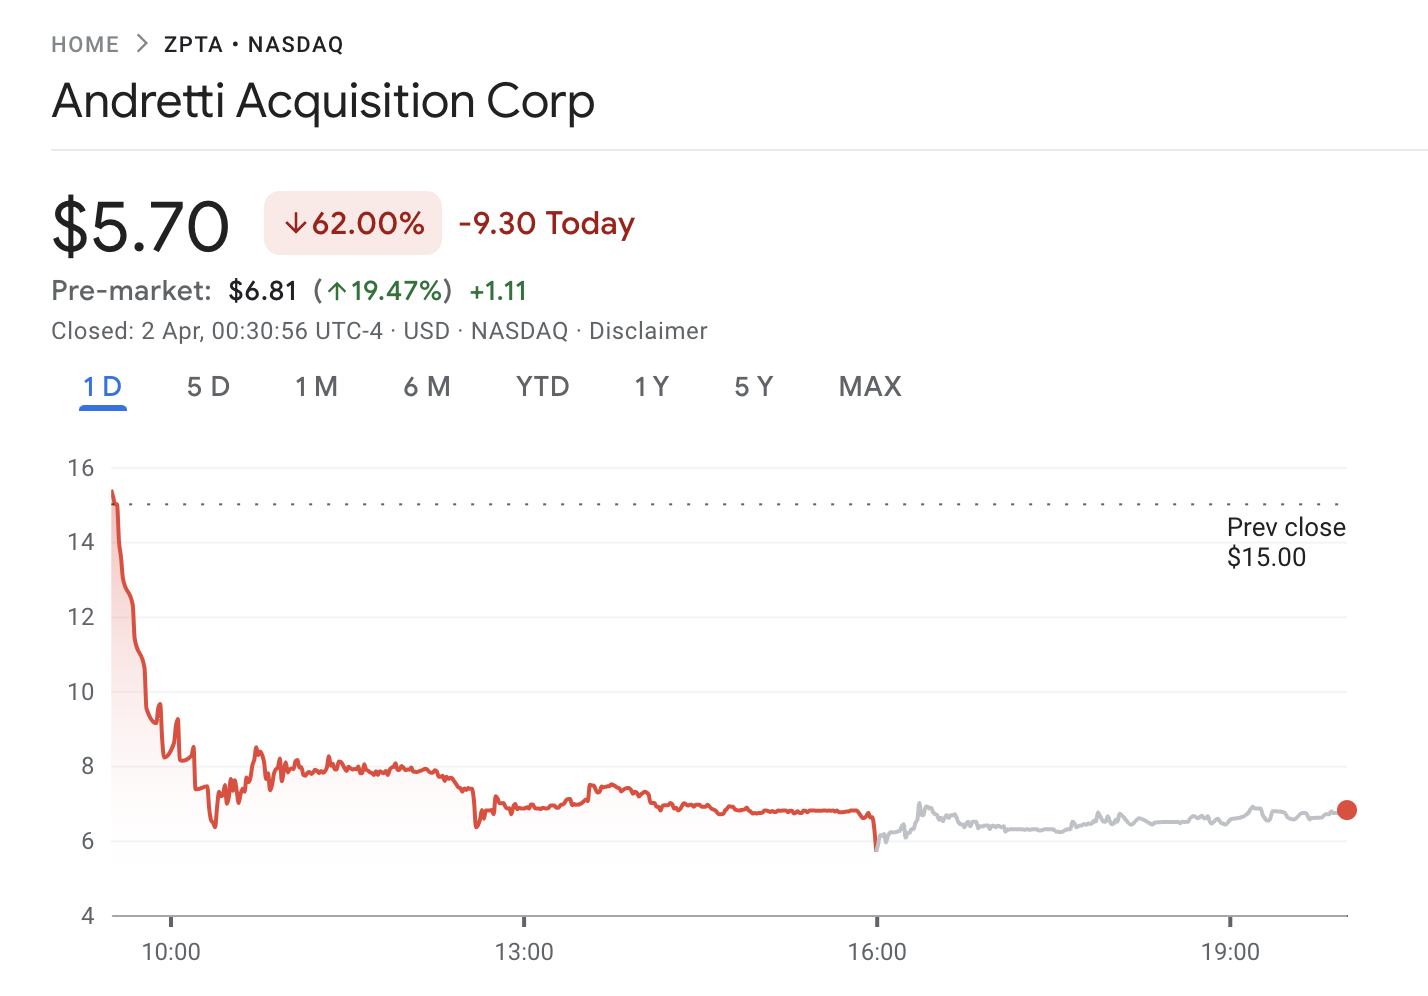 Zapata Ai Suffers A 60% Decline In Stock Price On The First Day As New Ticker Zpta Goes Live.